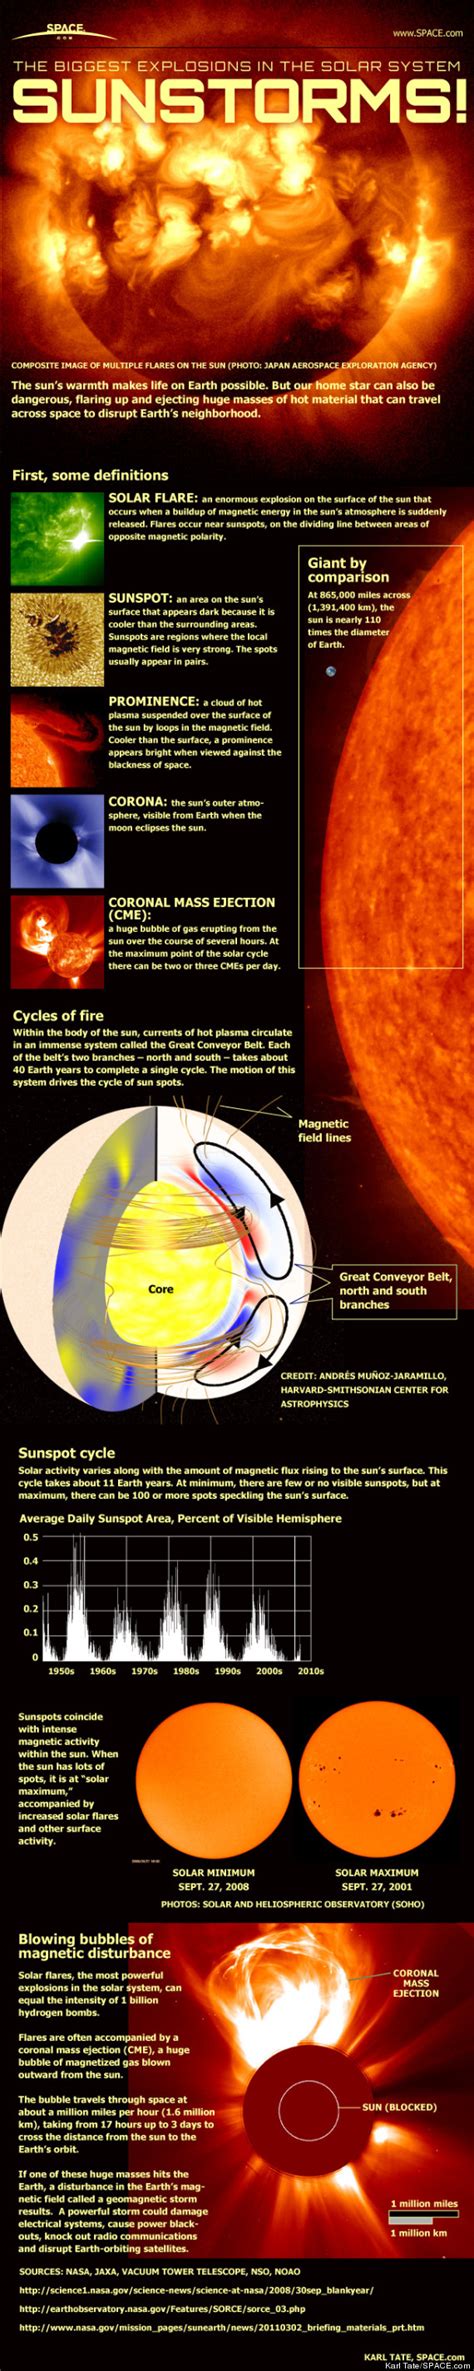 New Solar Flare Study Sheds Light On How Sun Eruptions Form | HuffPost